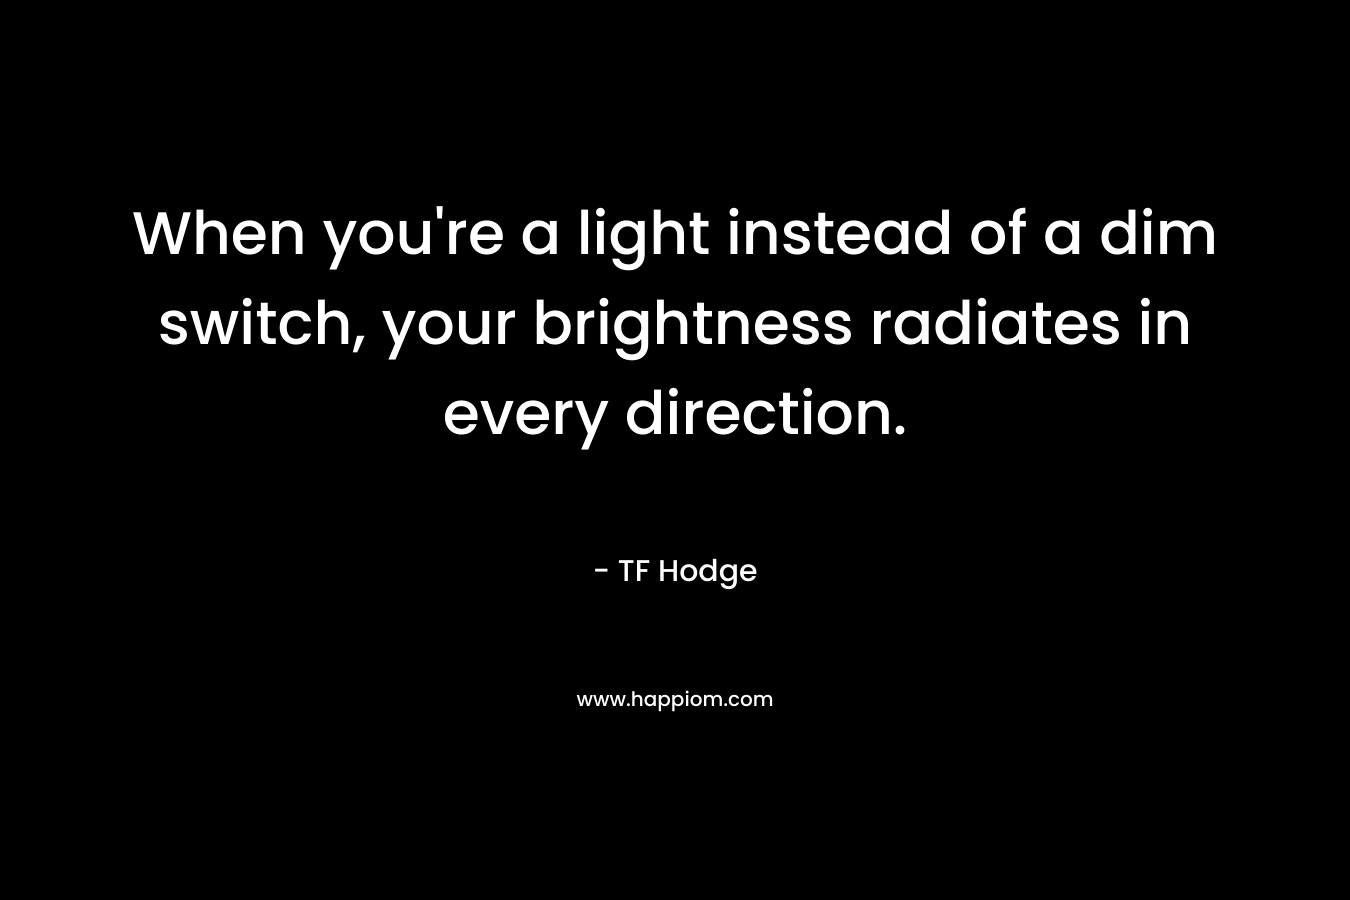 When you're a light instead of a dim switch, your brightness radiates in every direction.